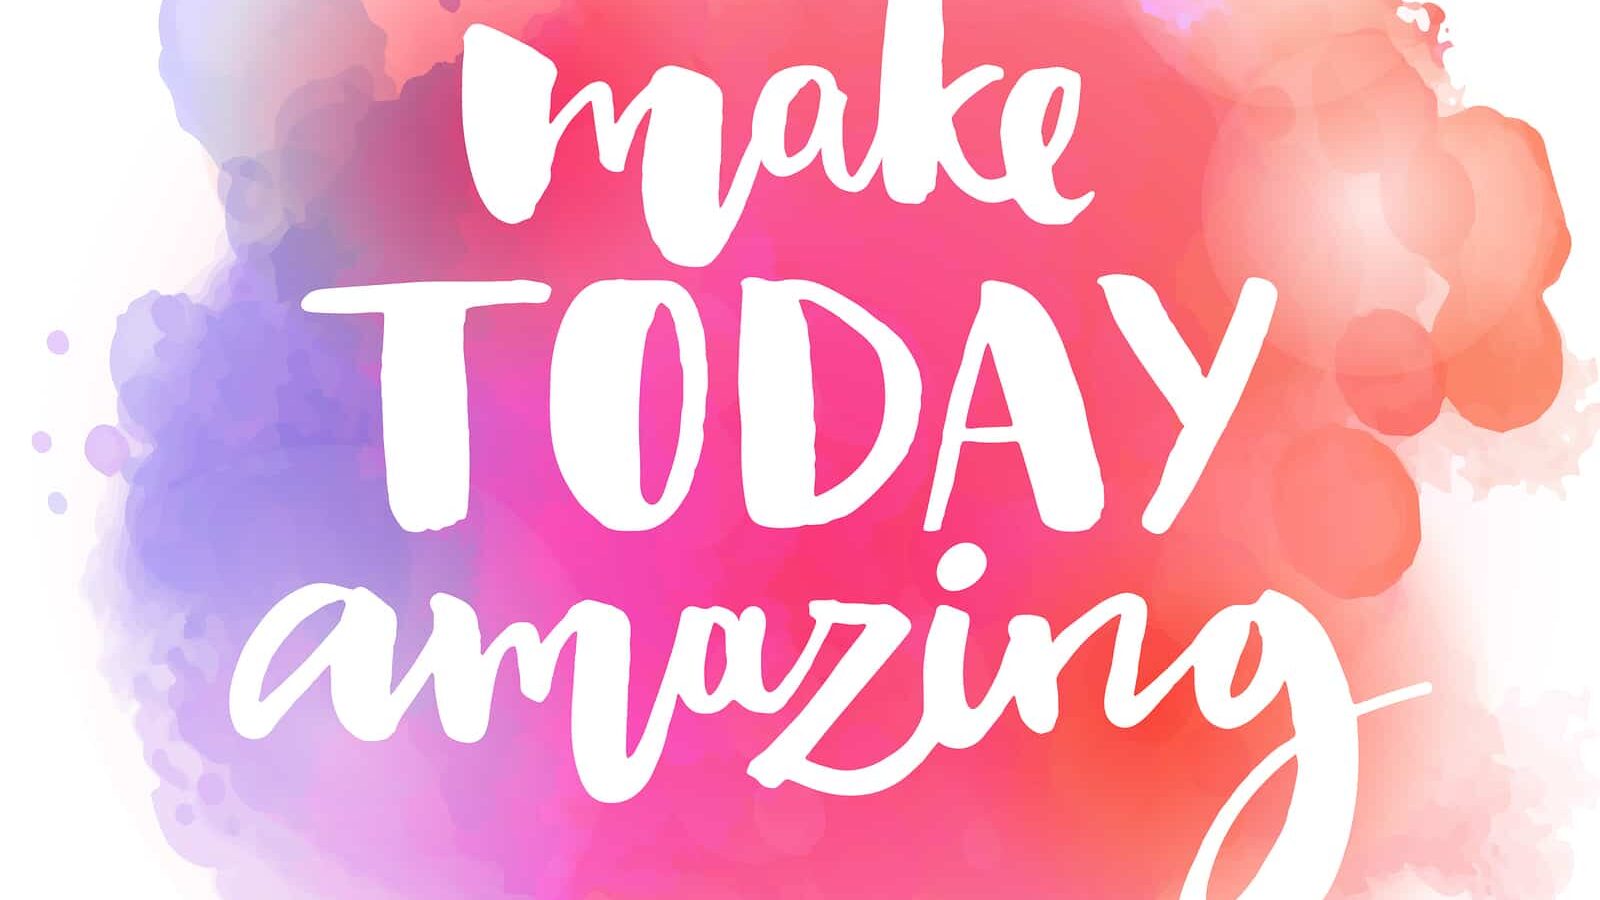 Make today amazing. Inspirational quote at colorful watercolor s